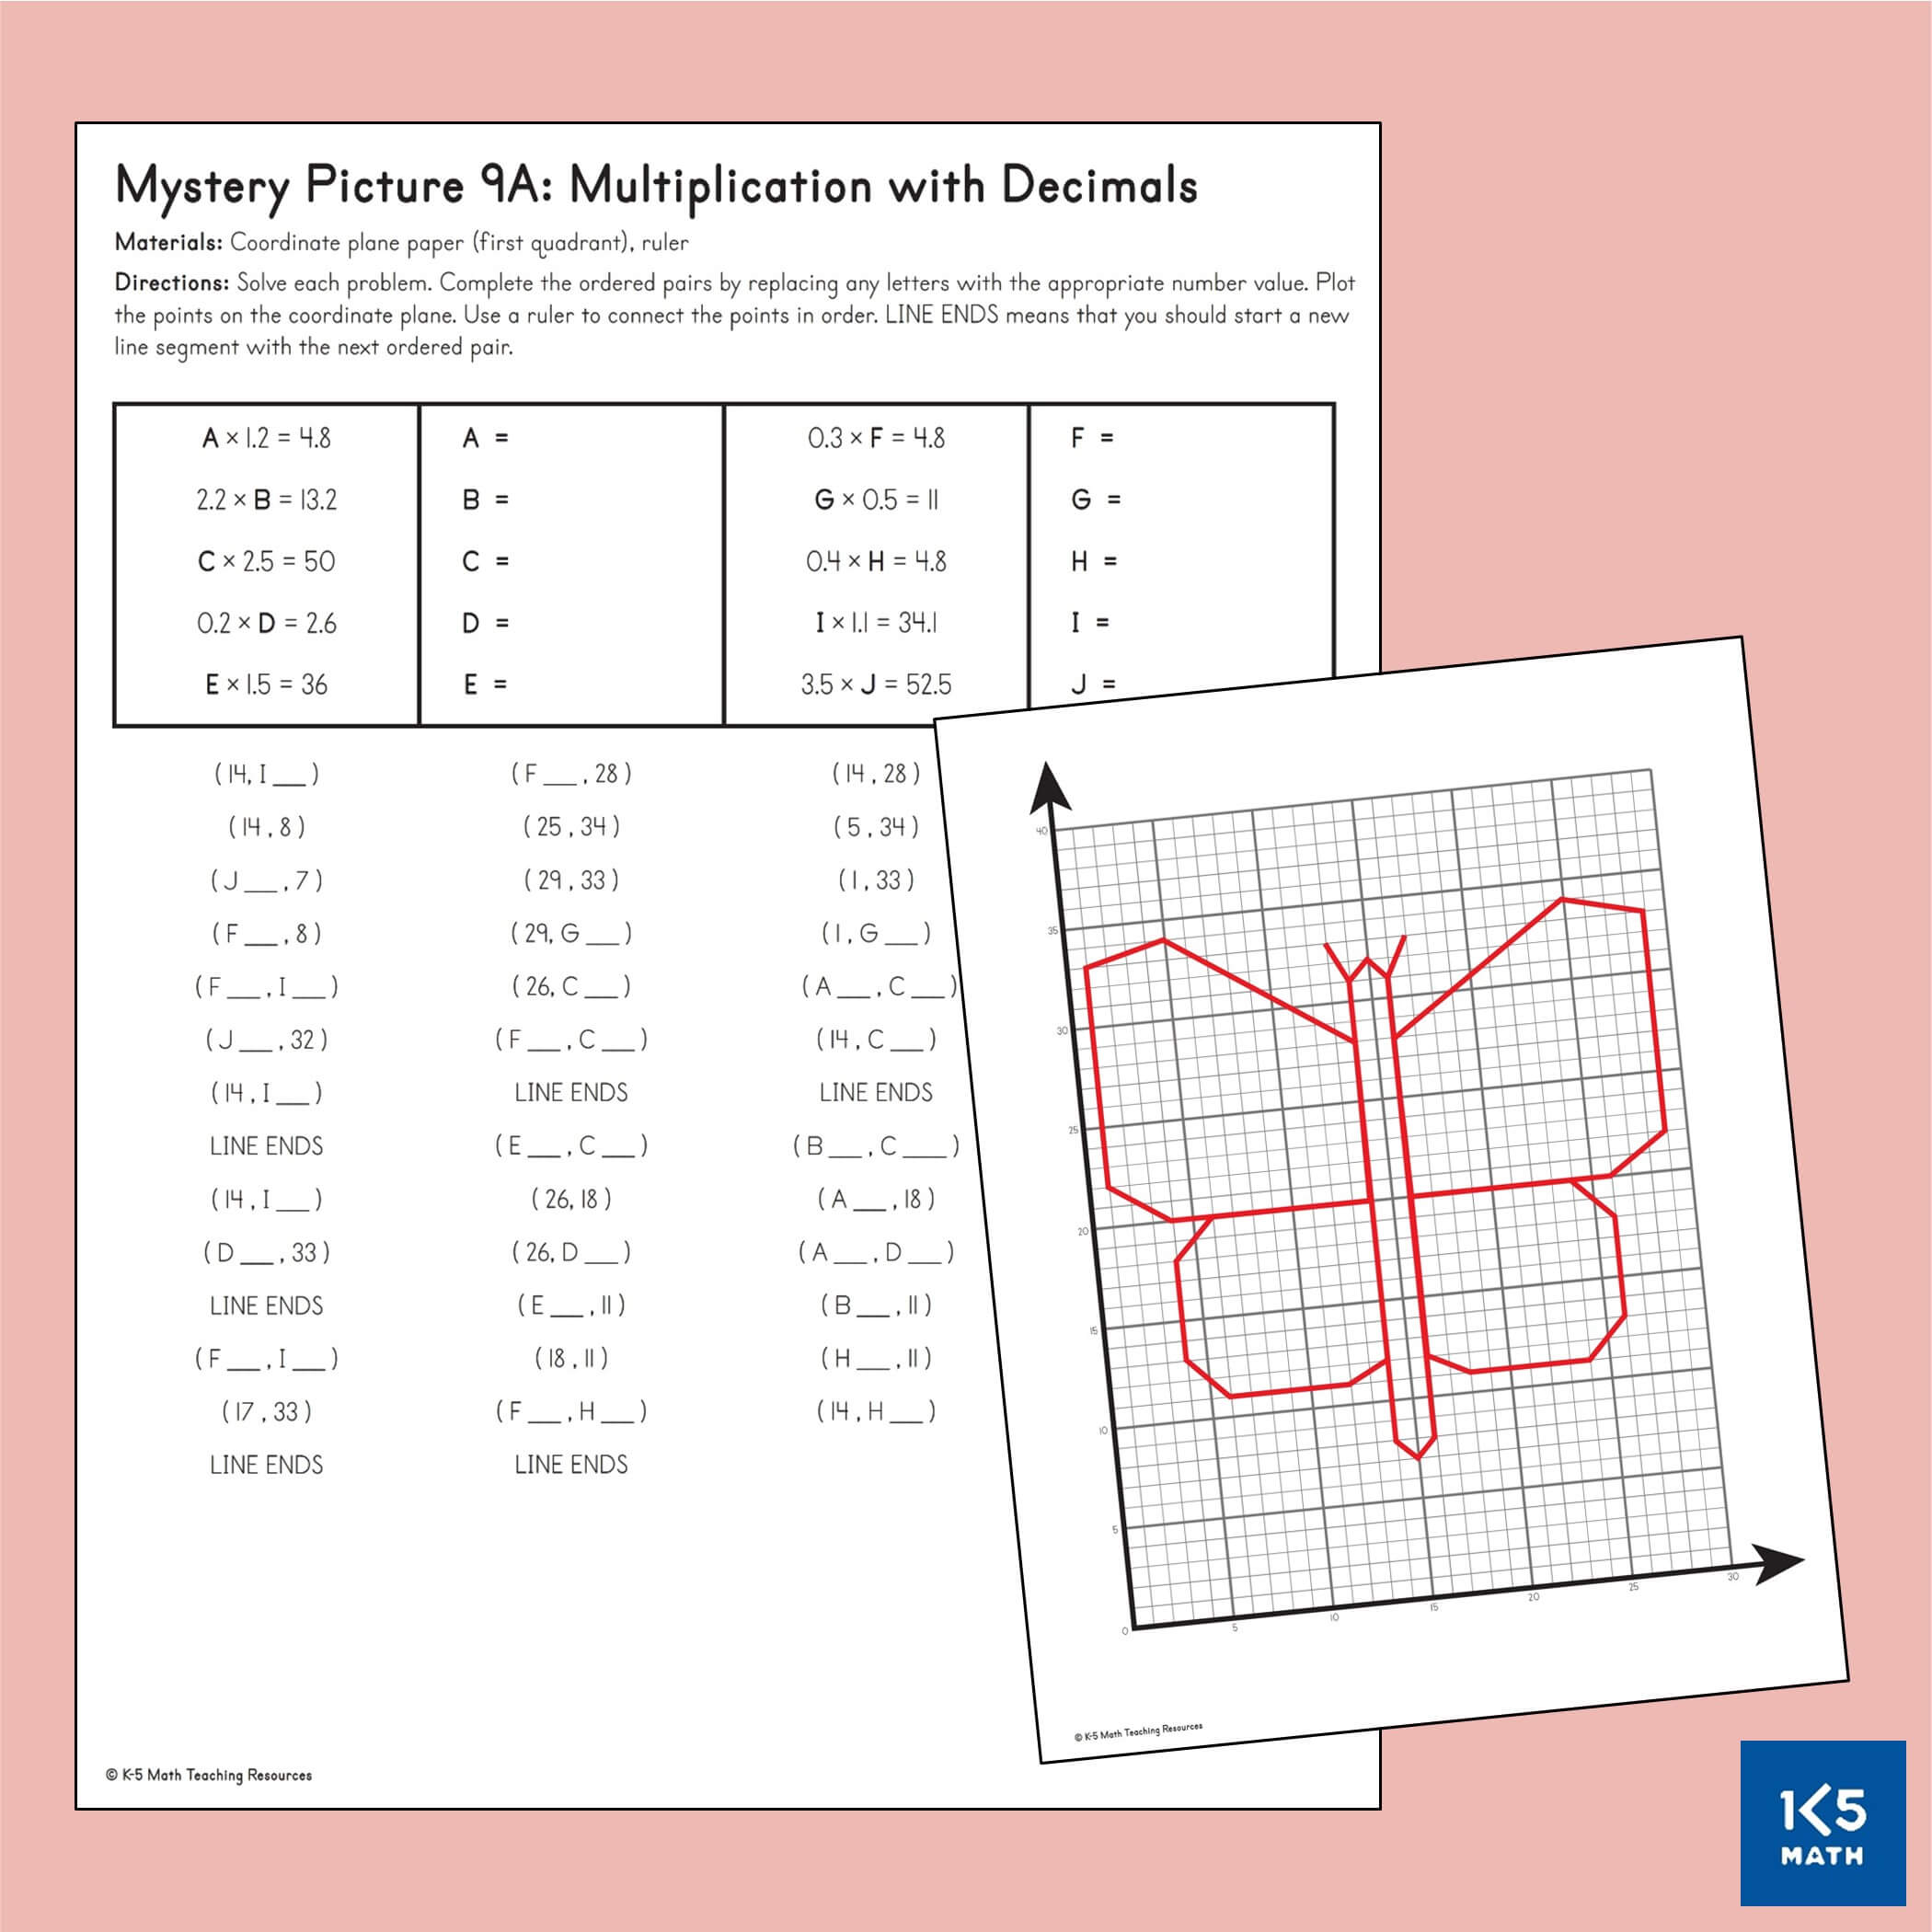 Coordinate Plane Mystery Picture 9A: Multiplication with Decimals